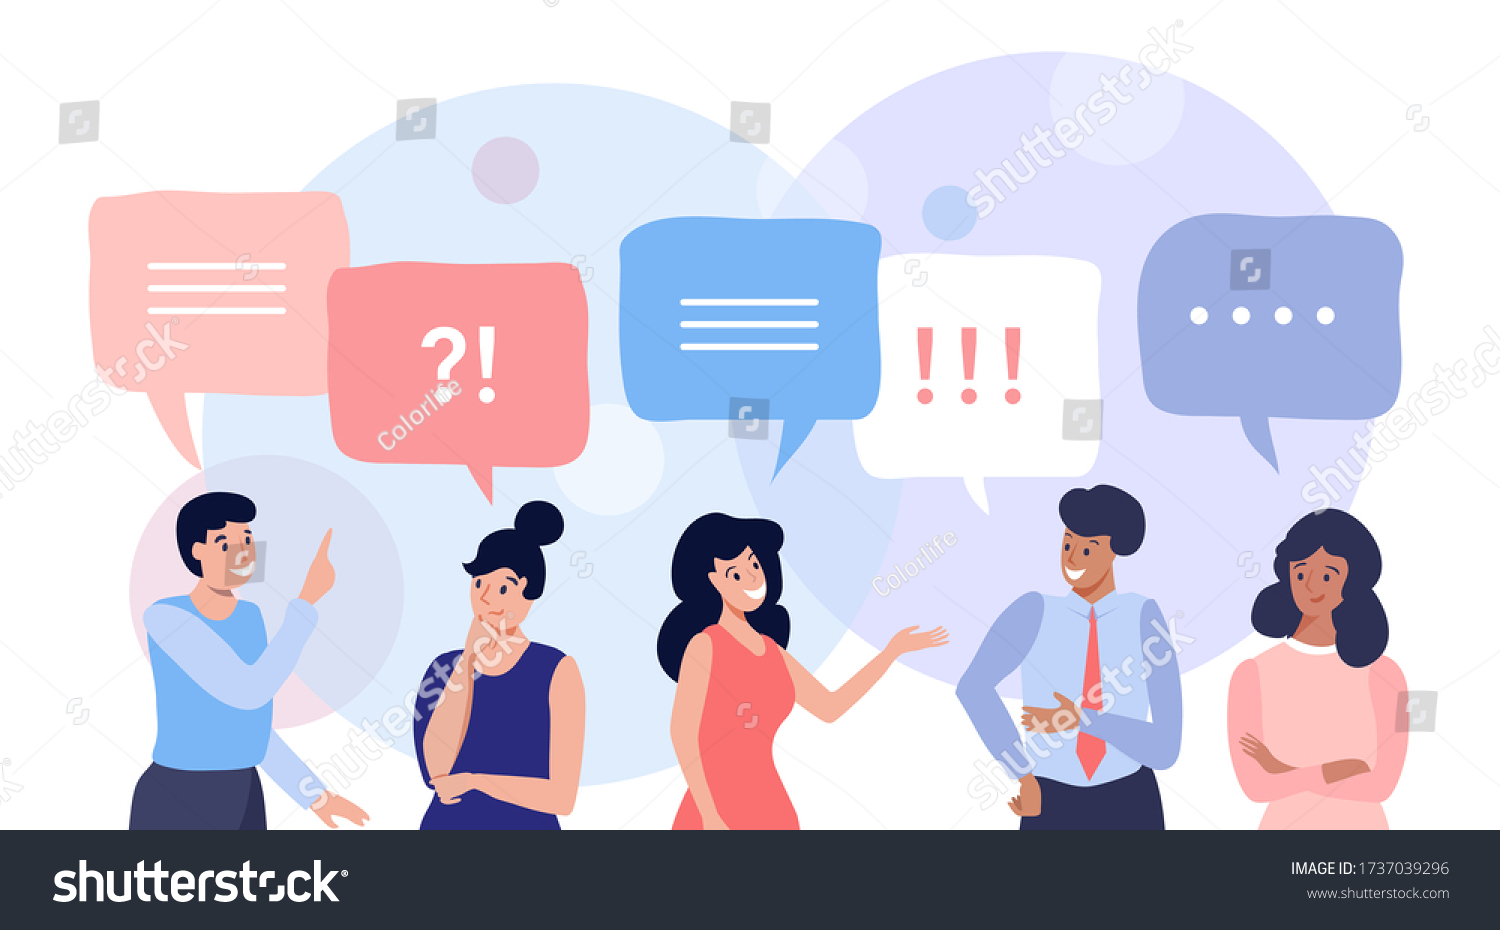 SVG of Group of people talking and thinking, friends with speech bubbles, vector flat illustration svg